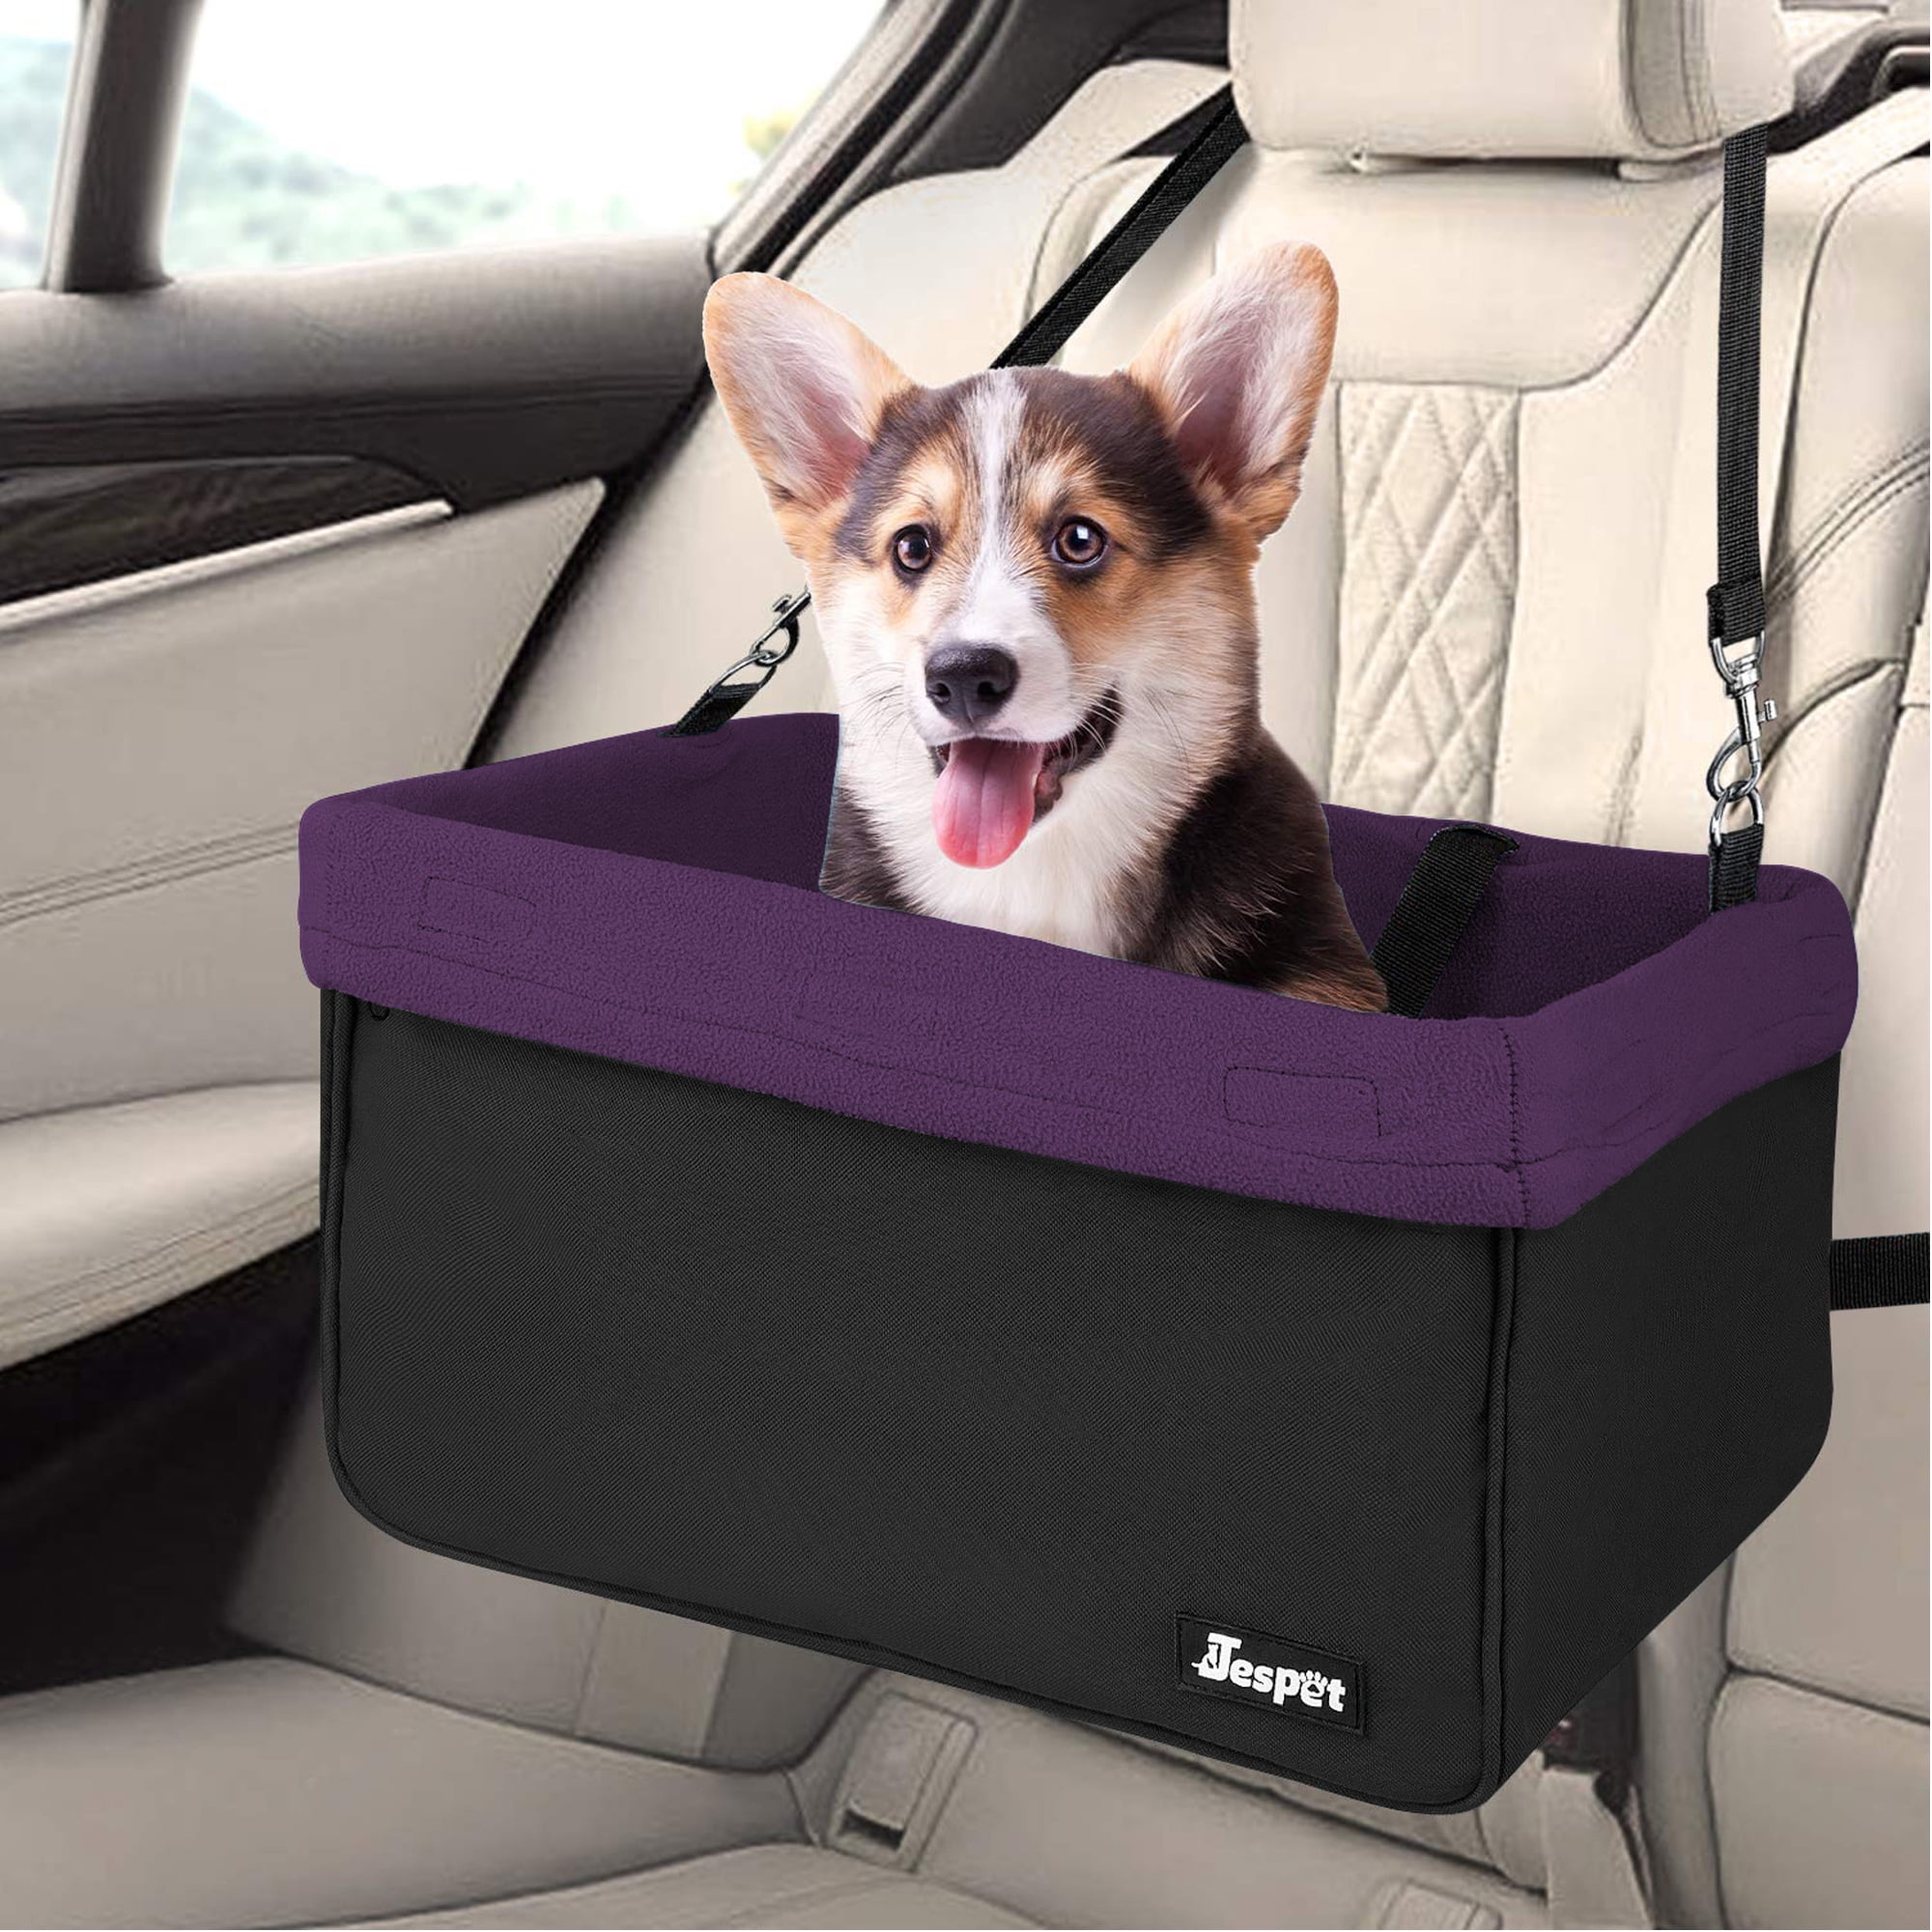 KUMIHON Dog Car Seat Pet Booster Seat Pet Travel Safety Car Seat Dog Bed for Car and Home with Storage Pocket and Clip-On Safety Leash Disassembled for Easy Cleaning 